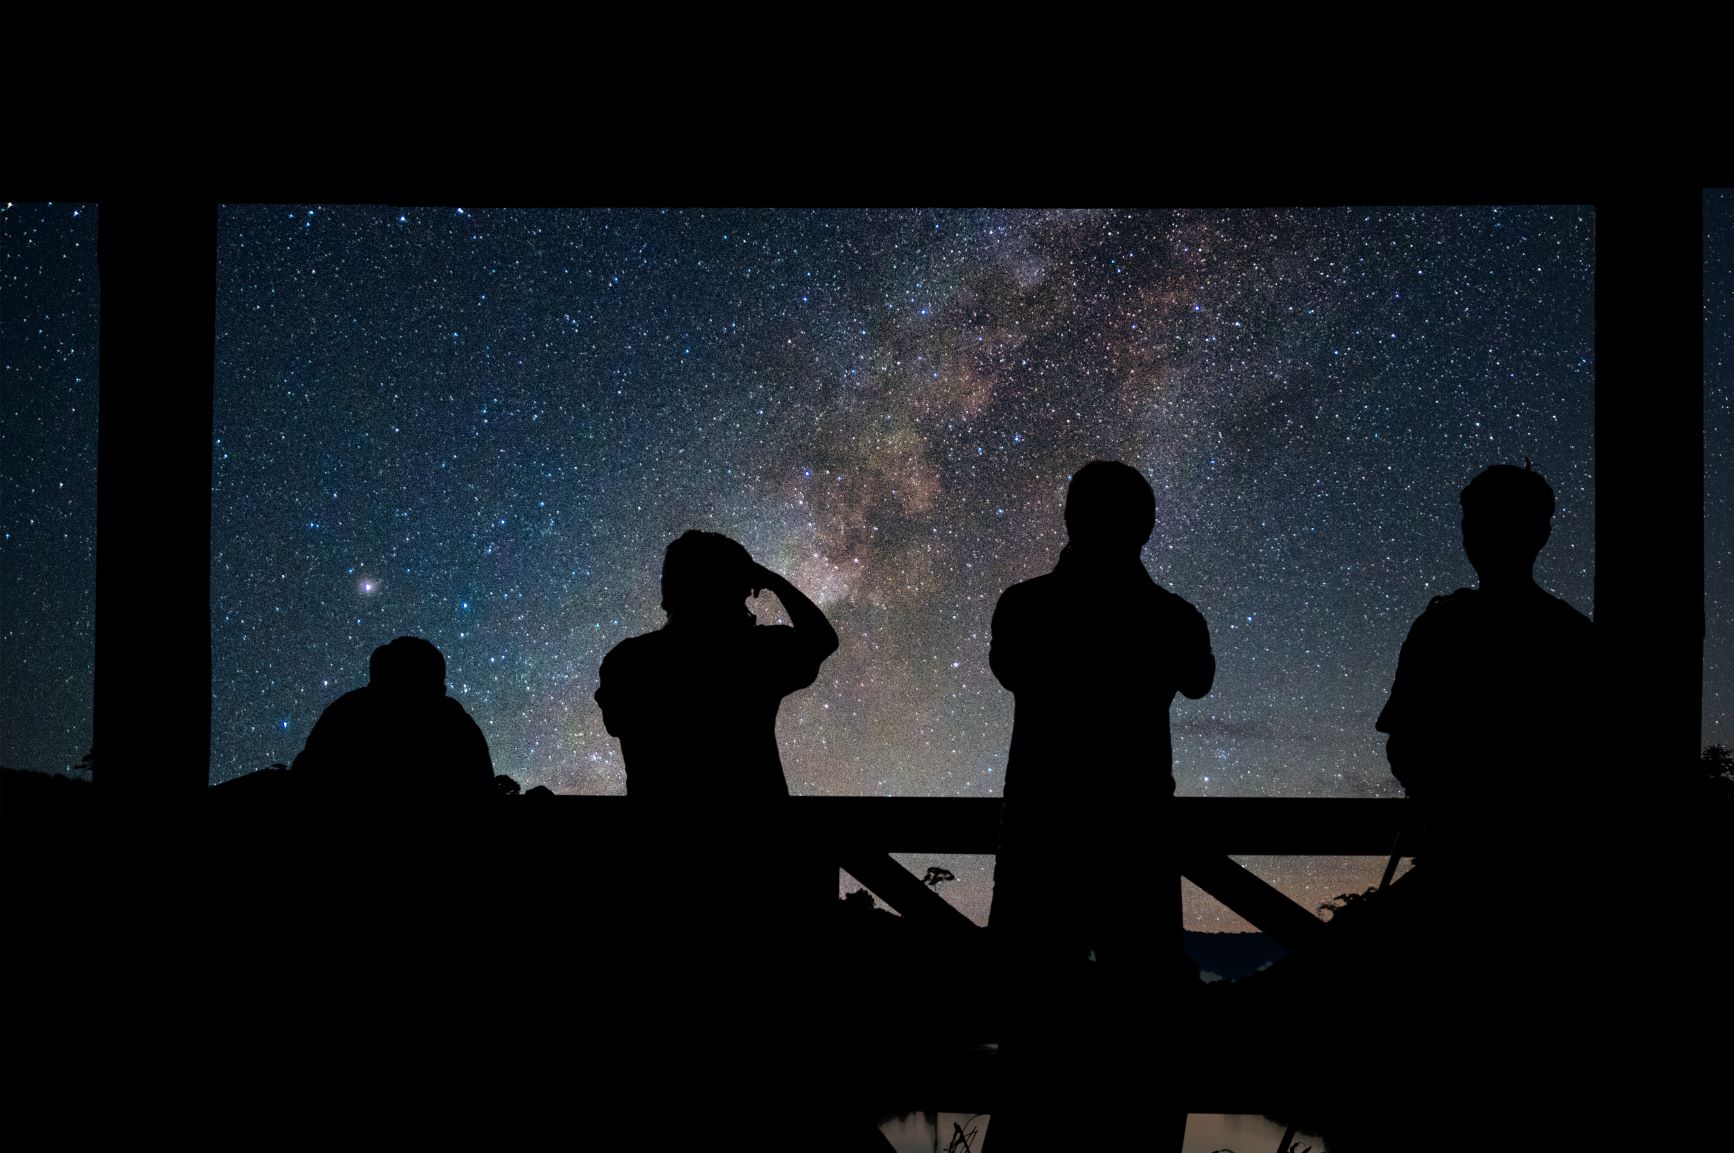 A dark starry night sky with people silhouetted in the darkness in the foreground